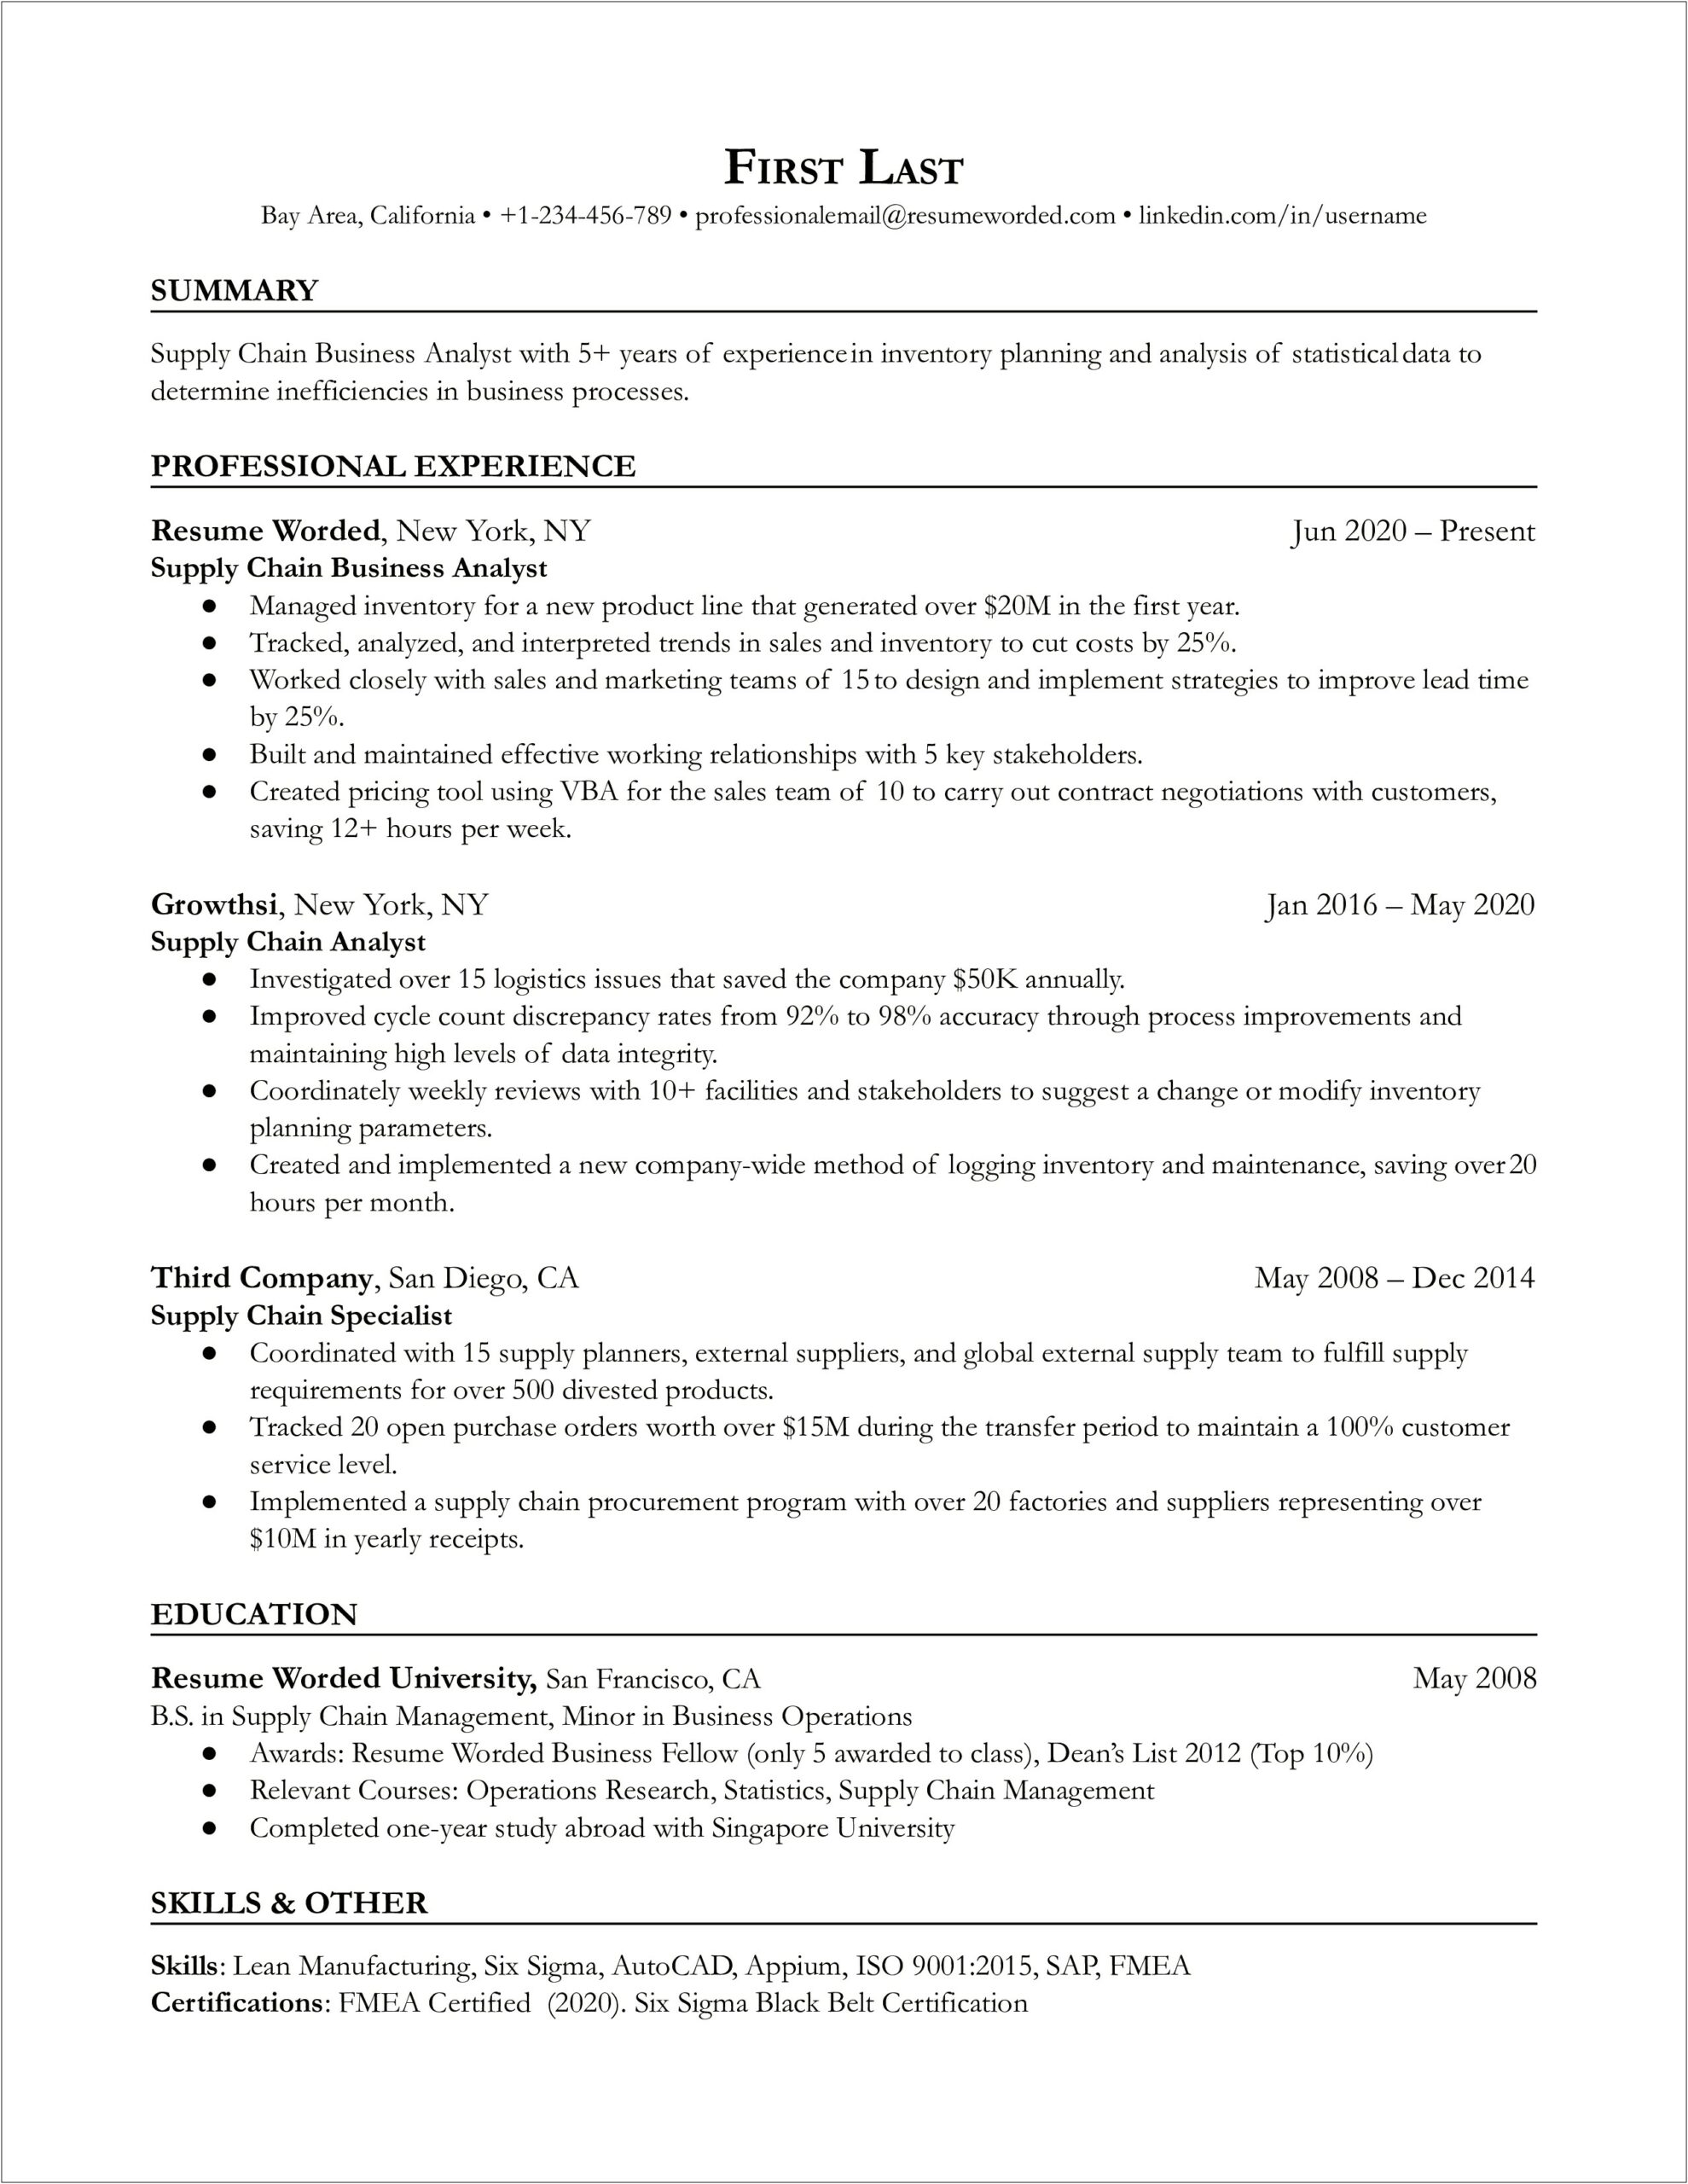 Resume Summary For Supply Chain Management